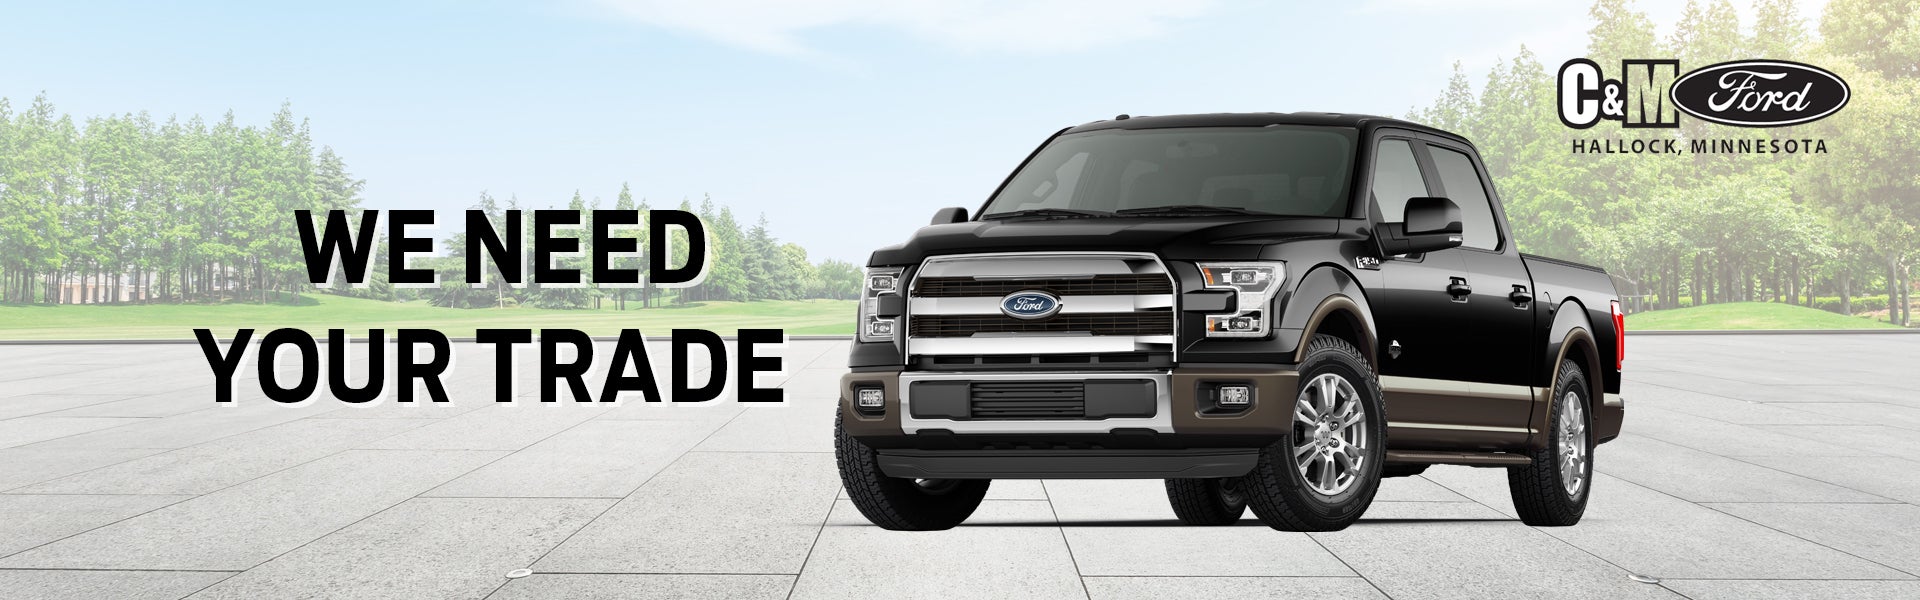 Ford Dealer in Hallock, MN | Used Cars Hallock | C & M Ford